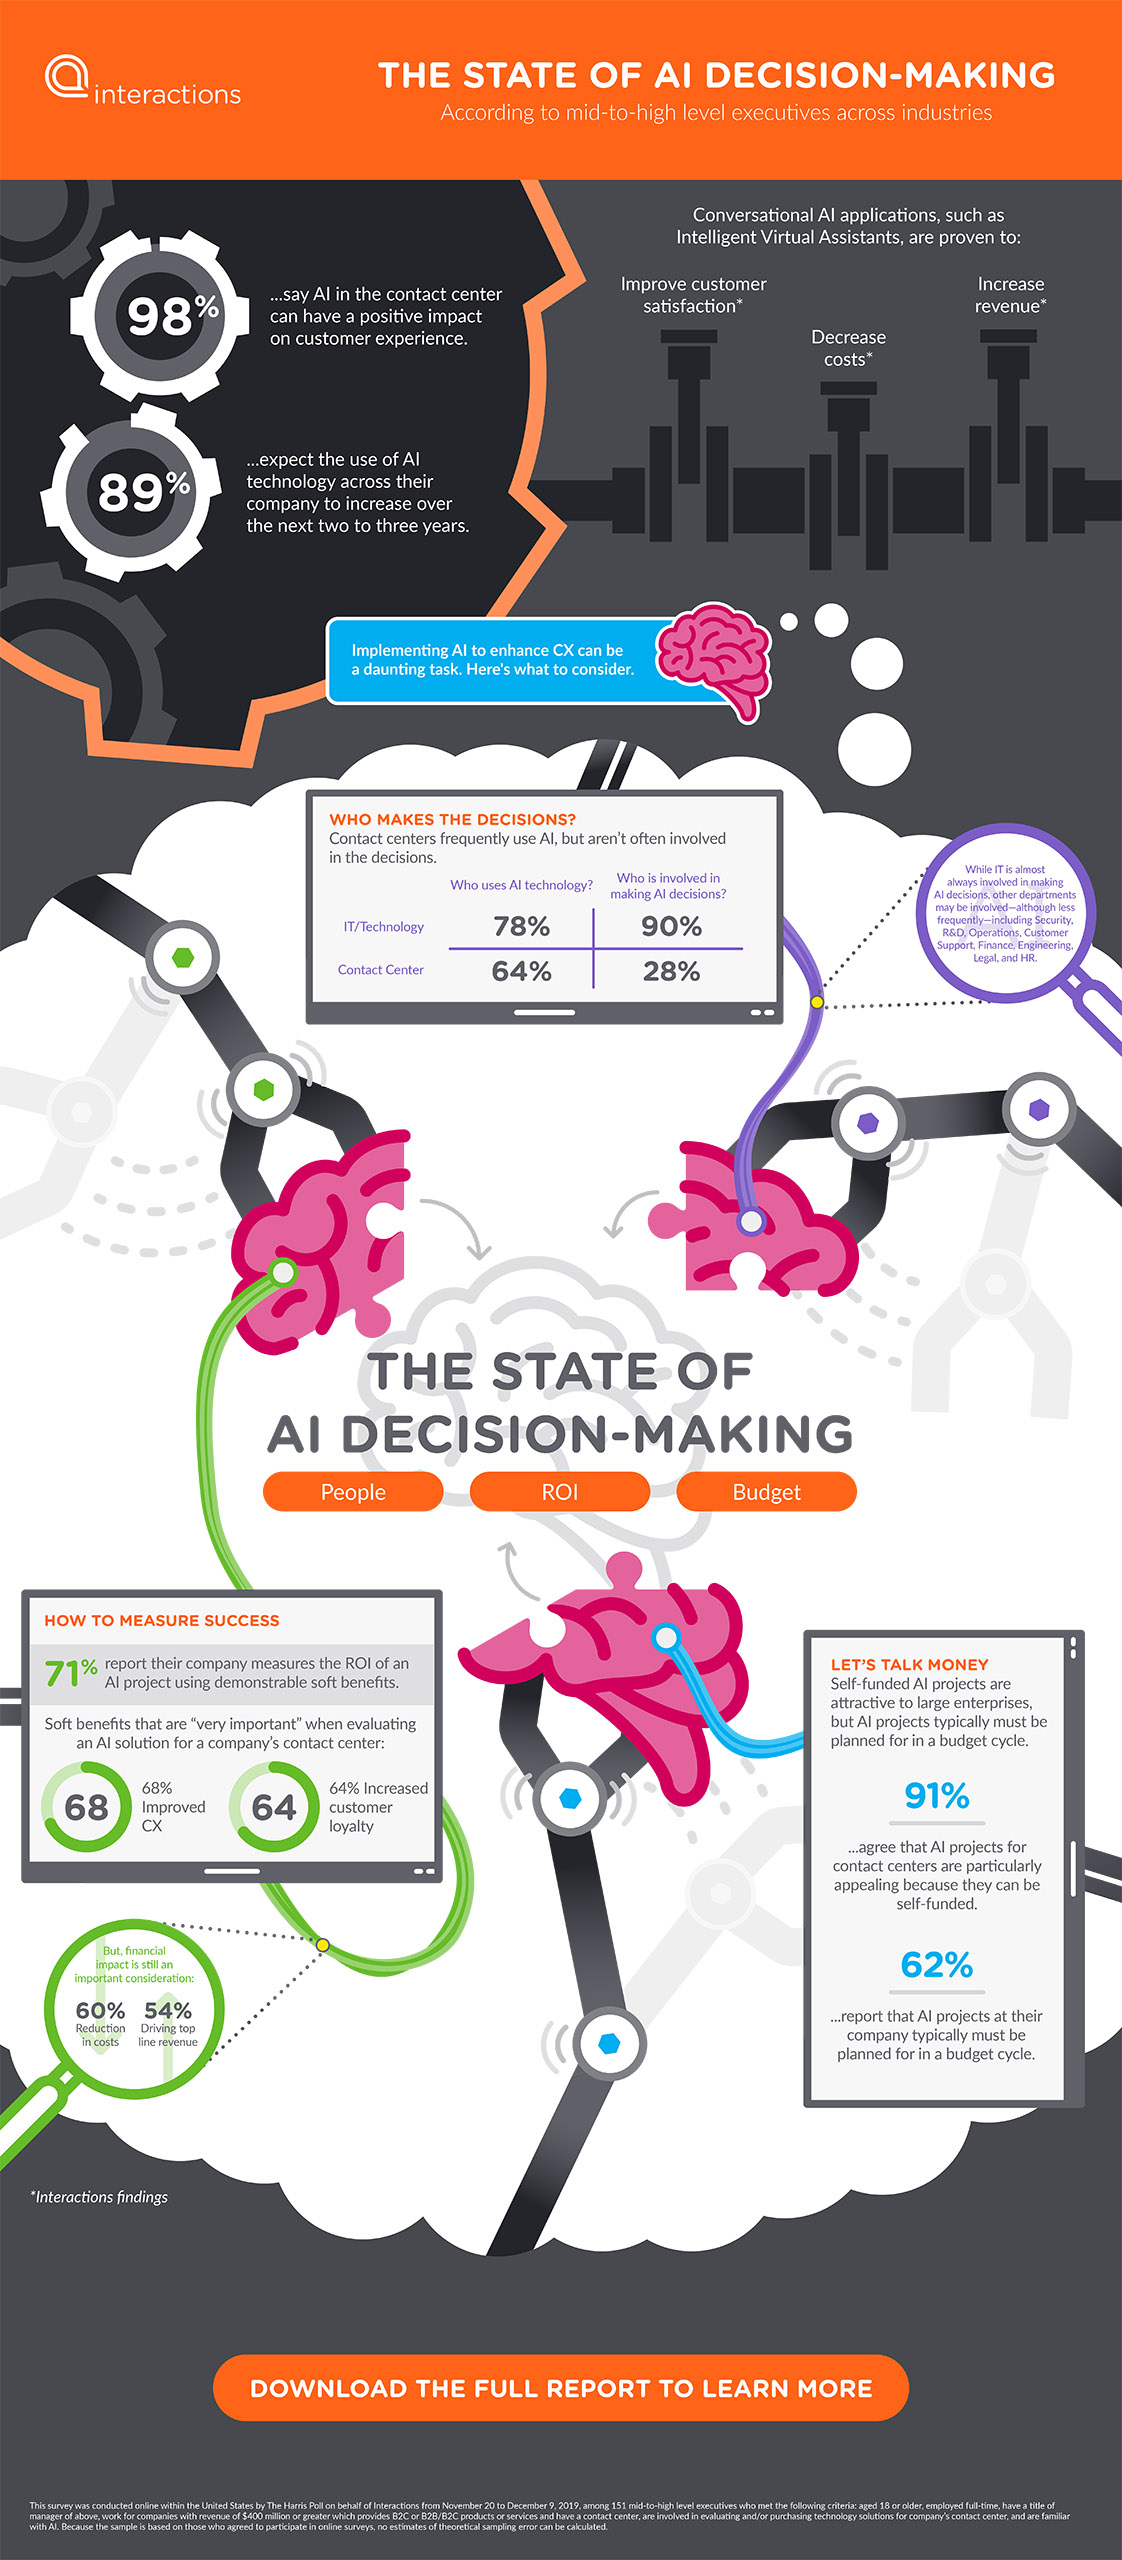 The State of AI Decision Making